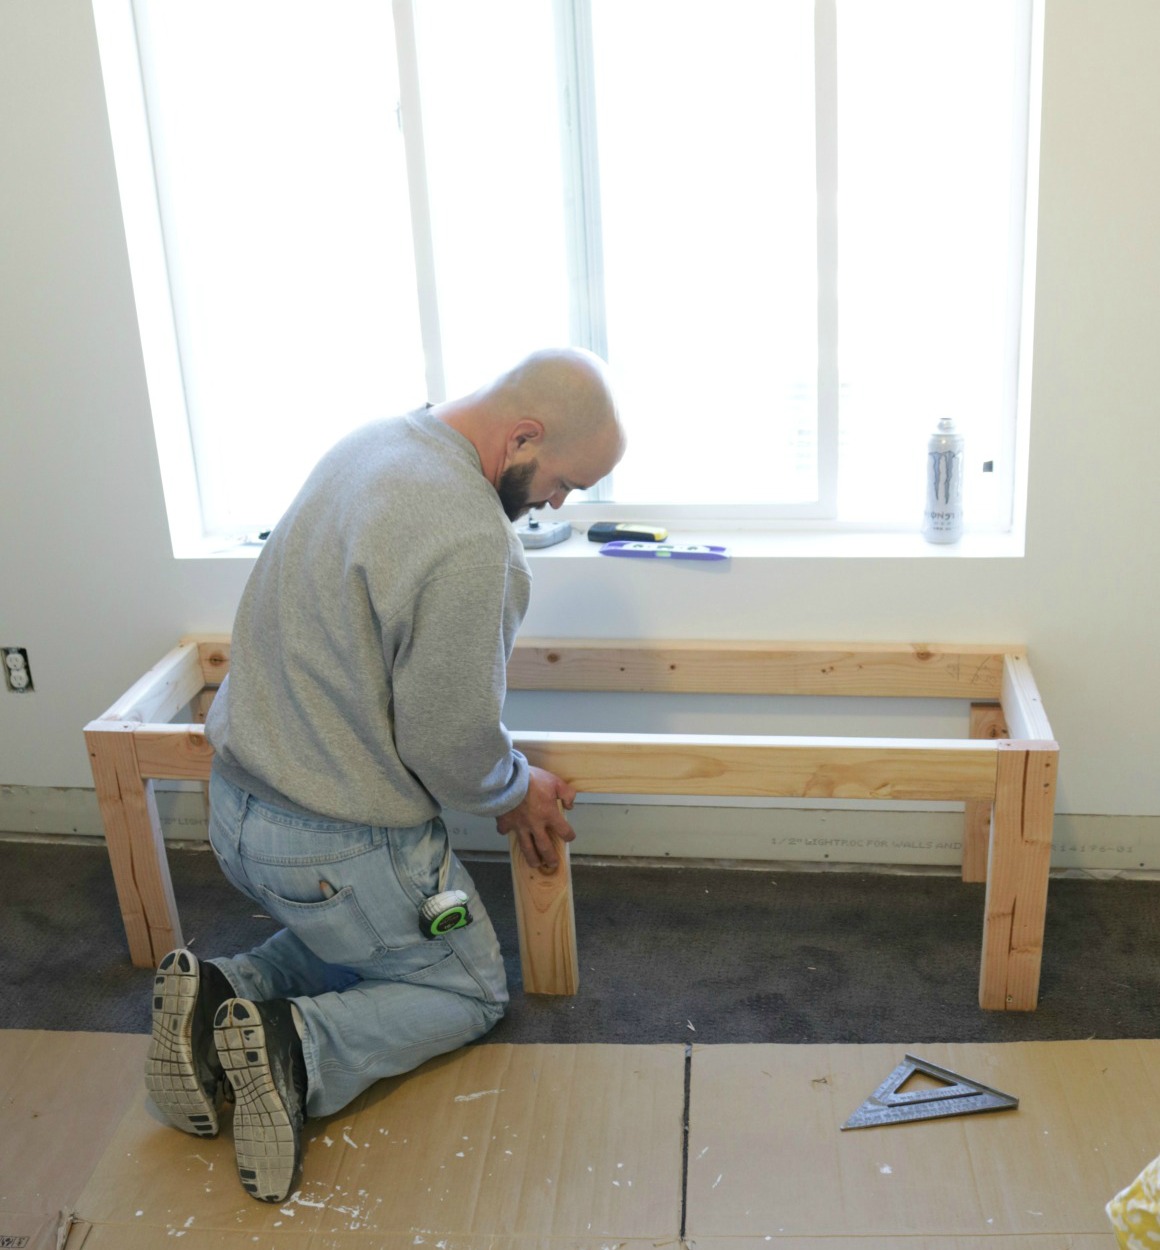 How To Build A Window Seat And Built In, Bookcase With Window Seat Plans